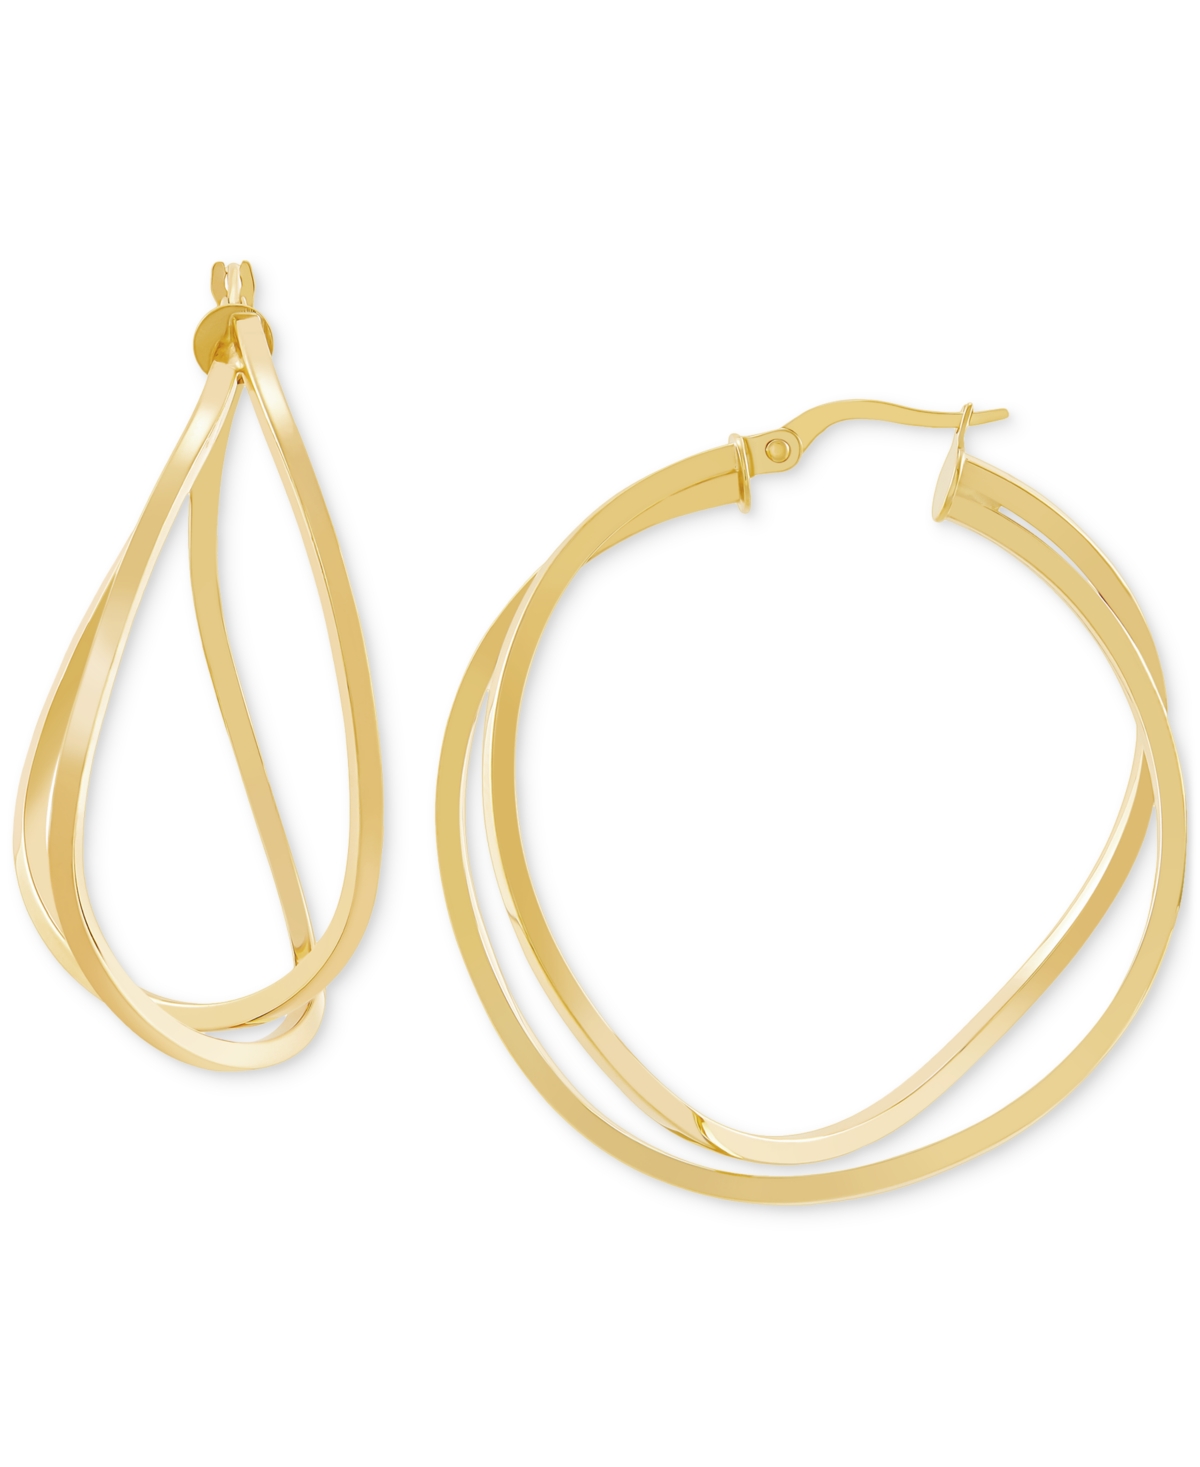 Italian Gold Polished Crossover Double Medium Hoop Earrings In 14k Gold, 1-1/4" In Yellow Gold